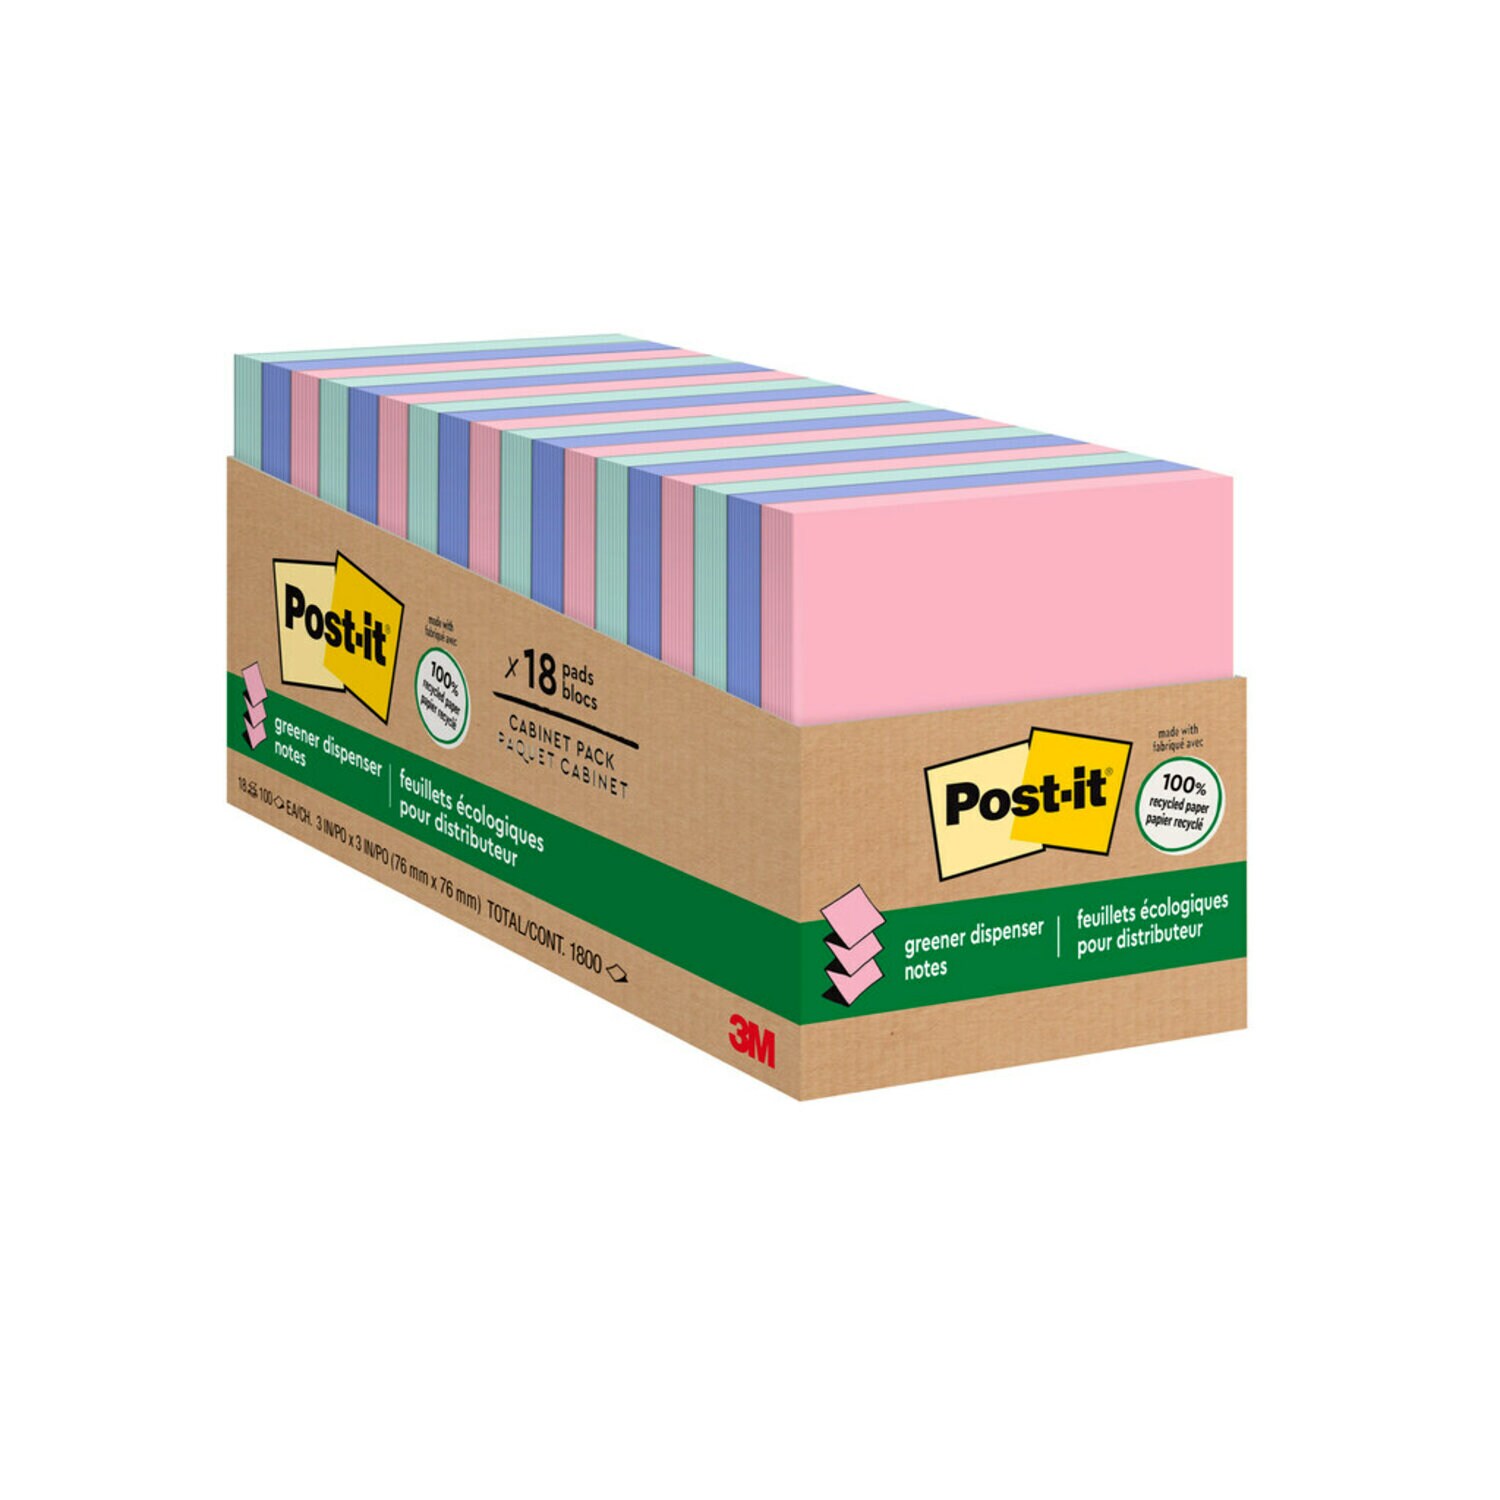 7100235632 - Post-it Dispenser Pop-up Notes R330RP-18CP, 3 in x 3 in (76 mm x 76 mm)